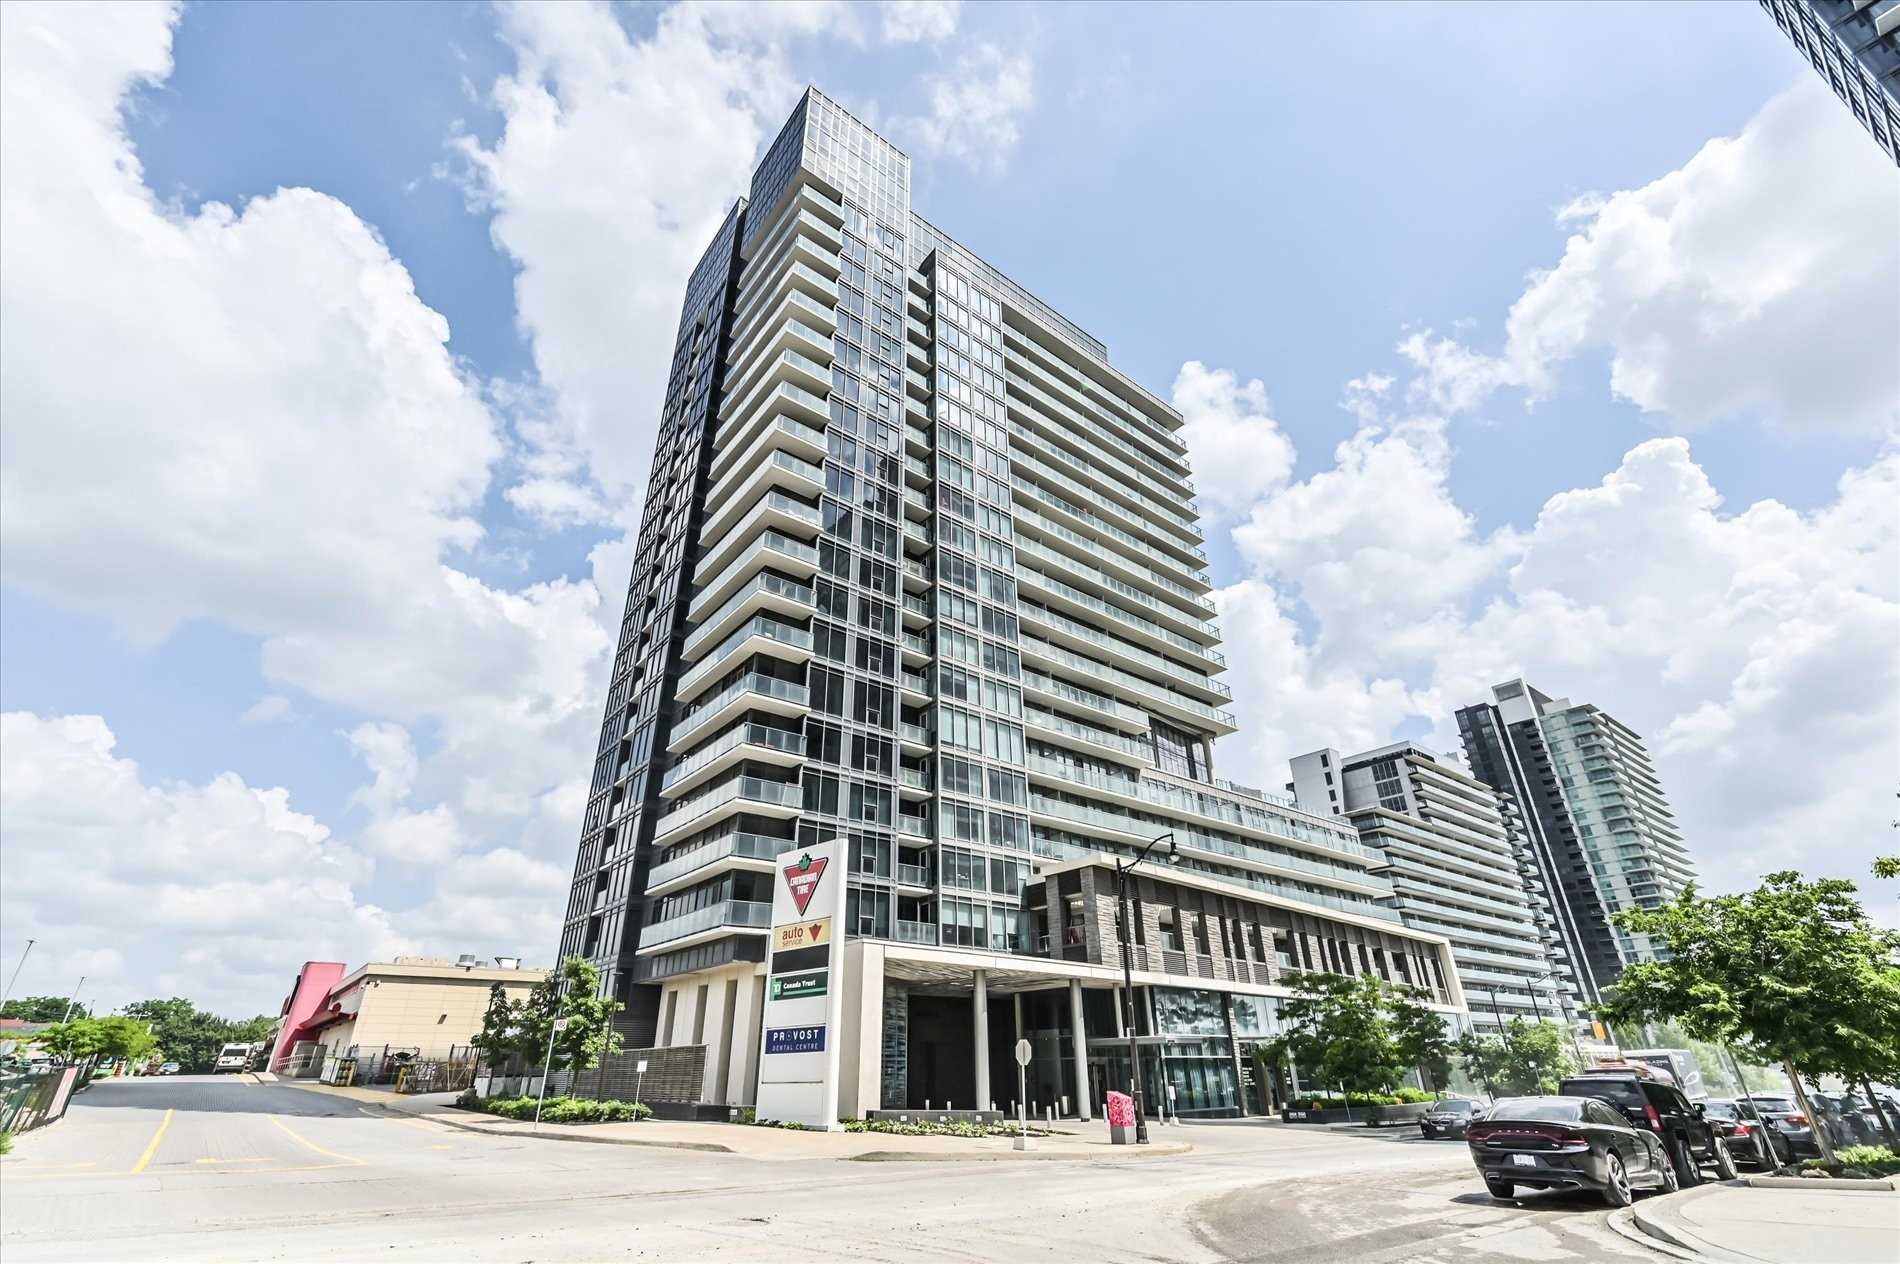 72 Esther Shiner Blvd. This condo at Tango II Condos is located in  North York, Toronto - image #1 of 2 by Strata.ca